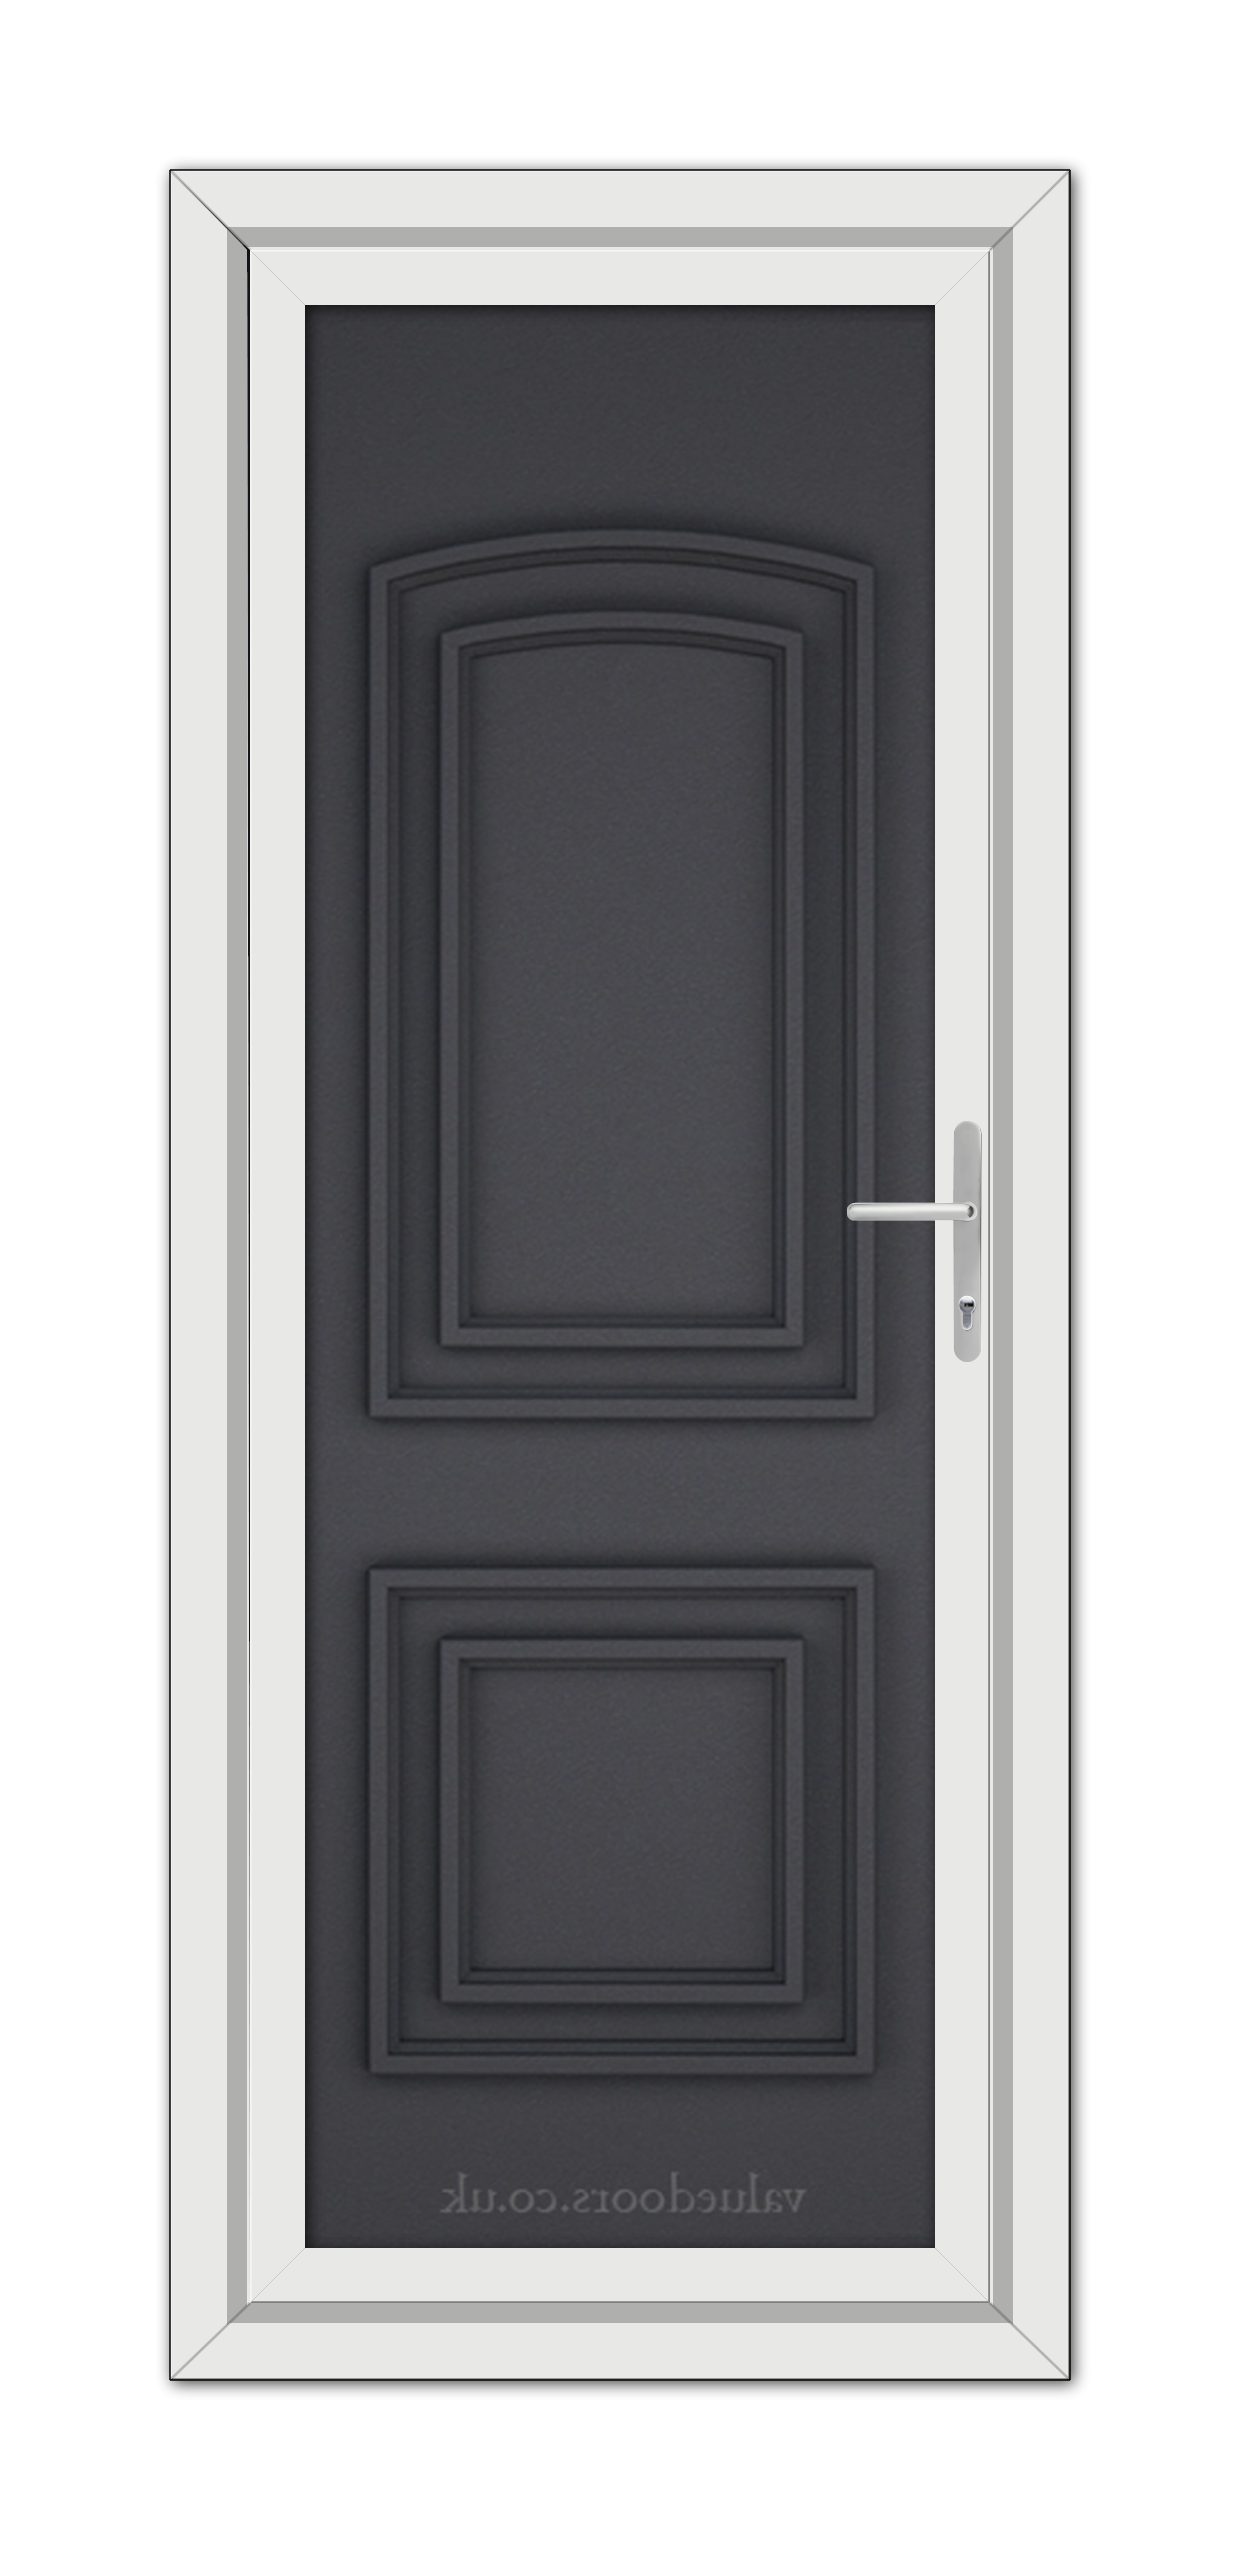 A vertical image of a closed, contemporary Grey Grained Balmoral Solid uPVC door with a silver handle, framed by a white doorframe.